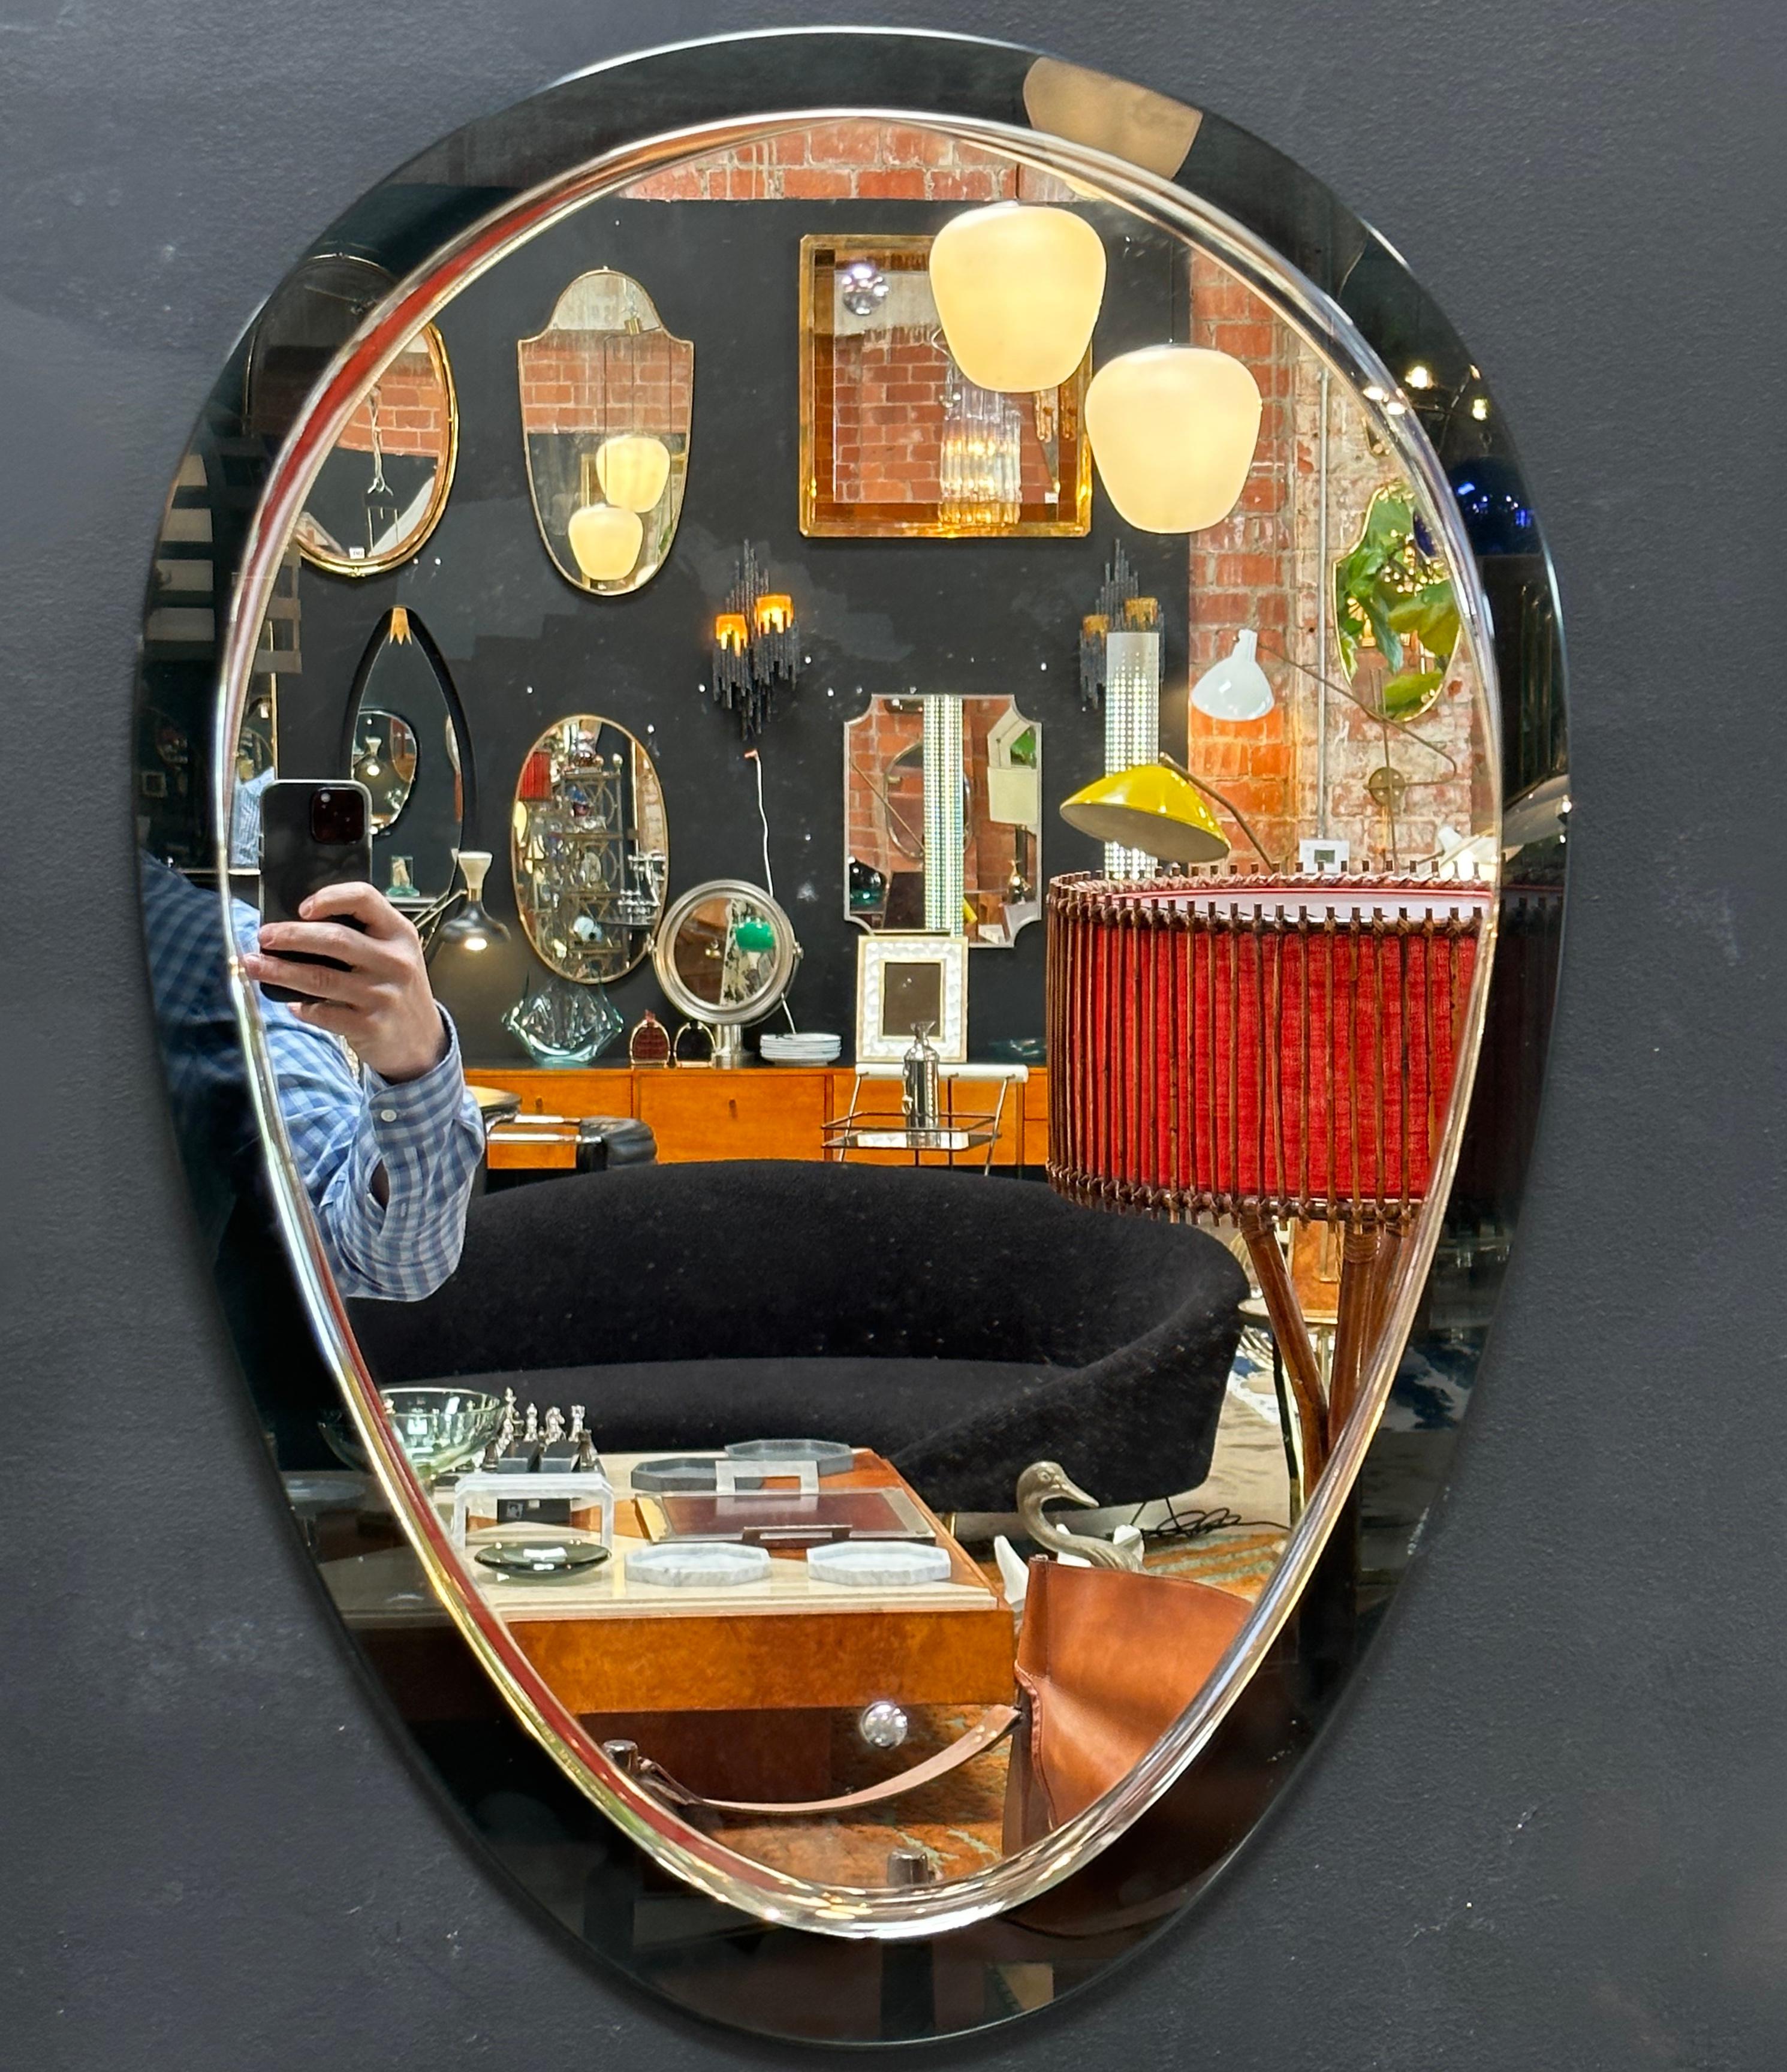 Cristal Arte was a manufacturer of glass products based in Italy during the 1960s. A double glass mirror by Cristal Arte typically consists of two glass panels with a reflective surface sandwiched between them.ouble glass mirrors can create